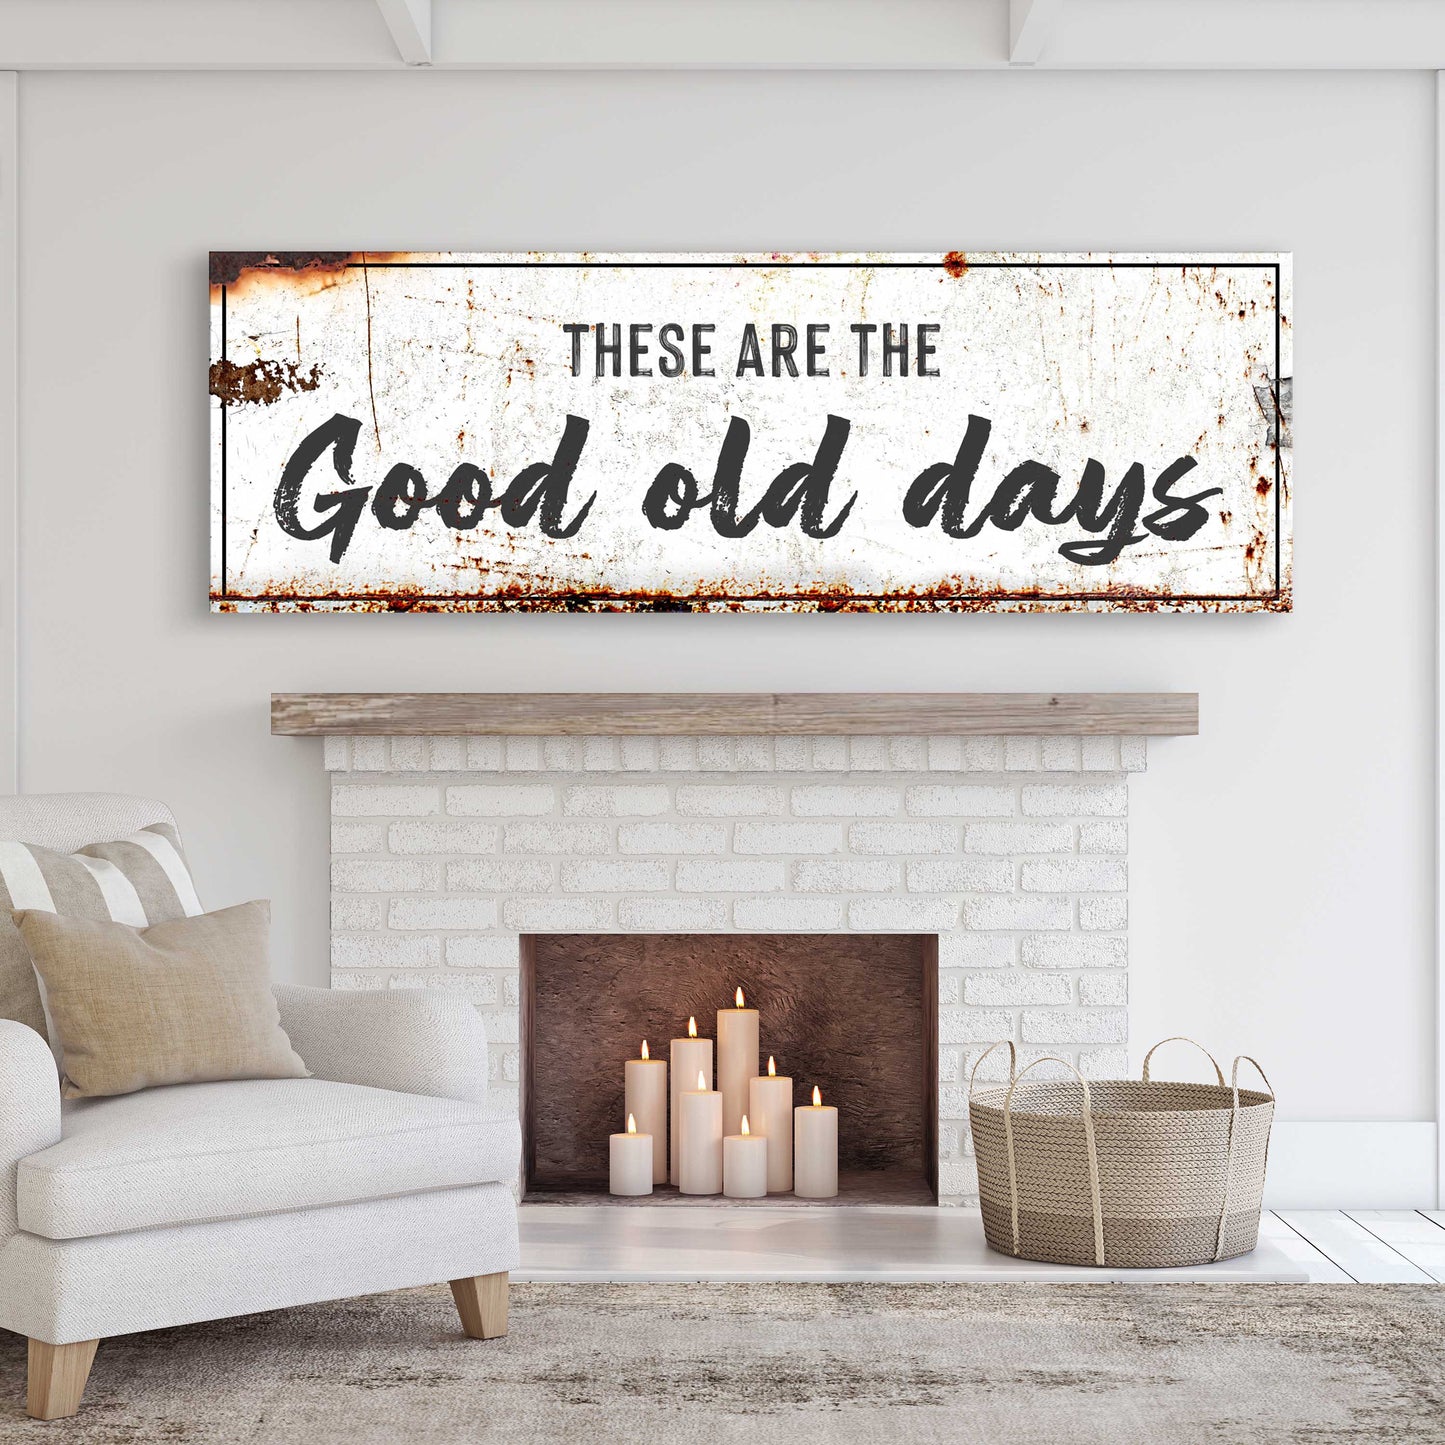 These are the Good Old Days Sign III - Image by Tailored Canvases